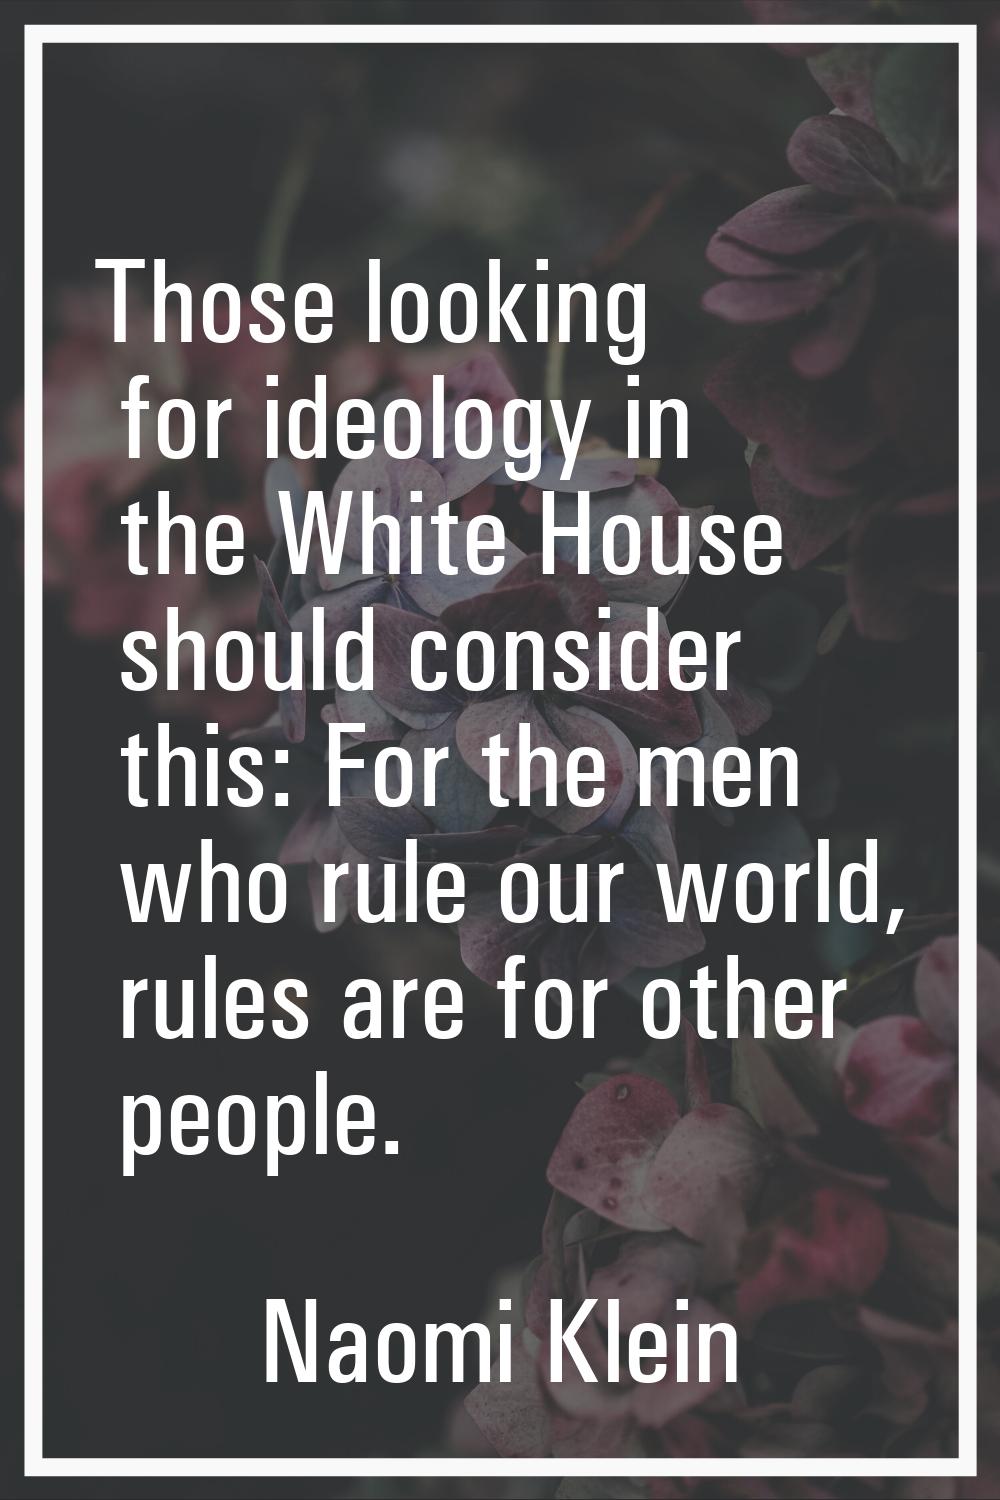 Those looking for ideology in the White House should consider this: For the men who rule our world,